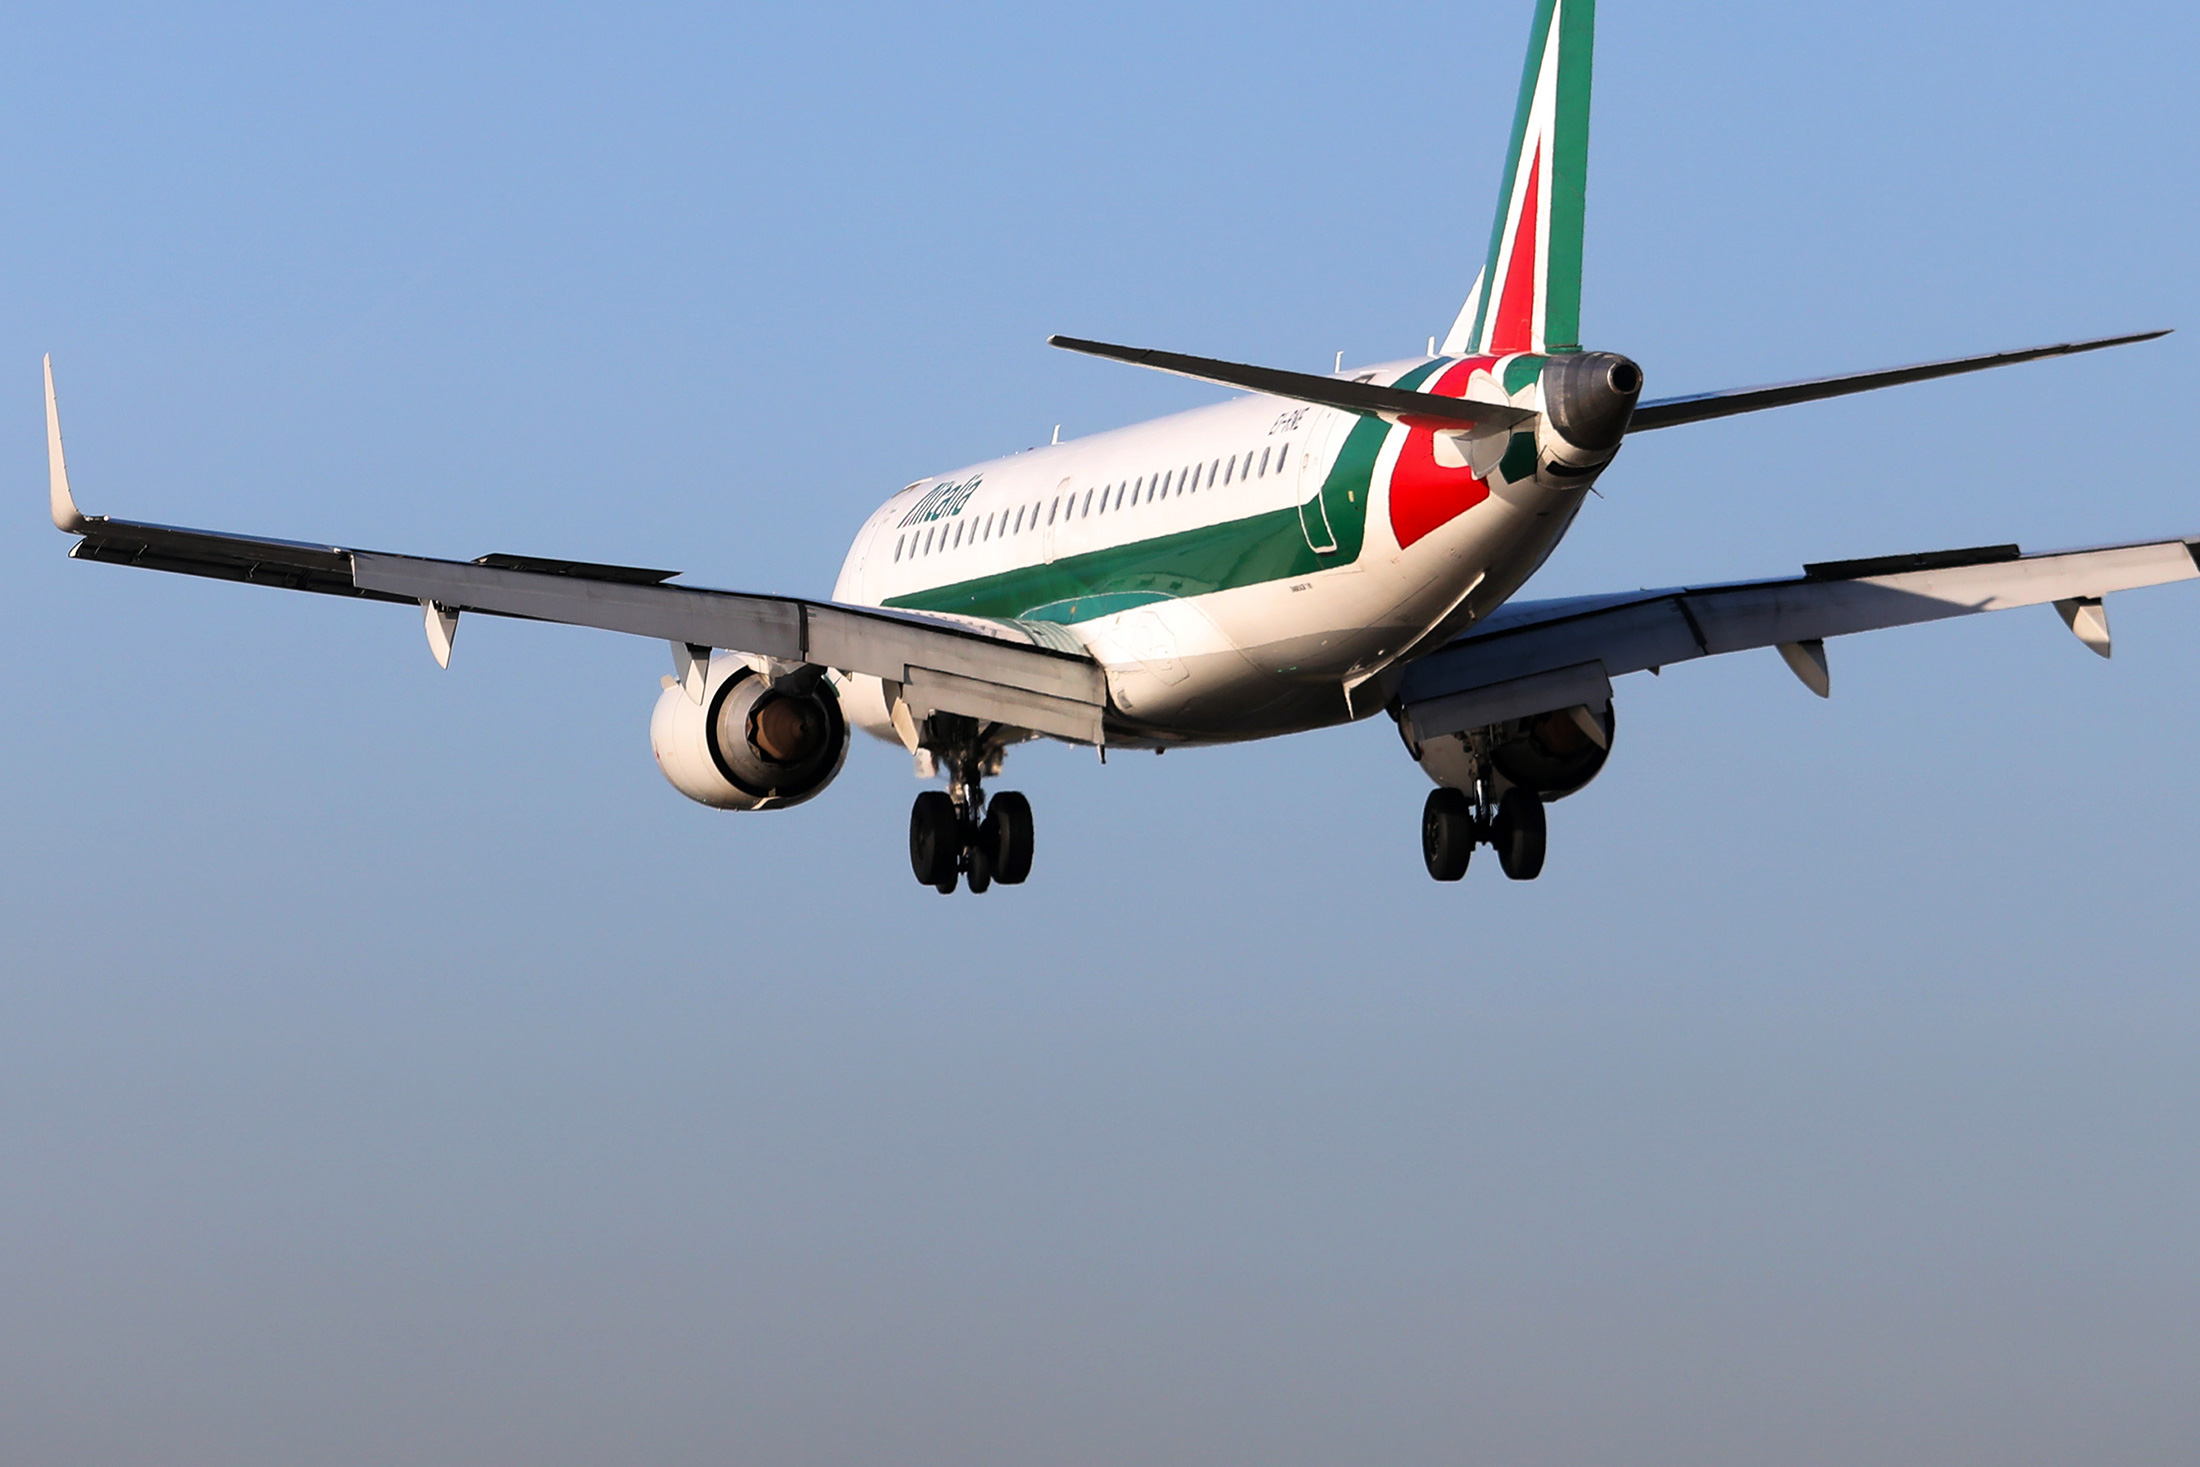 A bird flies past an Embraer passenger aircraft, operated by Alitalia SpA, as it prepares to land at London City Airport in London, U.K., on Thursday, Jan. 5, 2017. Alitalia shareholders approved Etihad Airways PJSC investment of up to $231m, Etihad became Alitalia's largest shareholder in 2014 as part of the Persian Gulf carrier's attempt to gain a European foothold by strengthening struggling carriers in the region.
